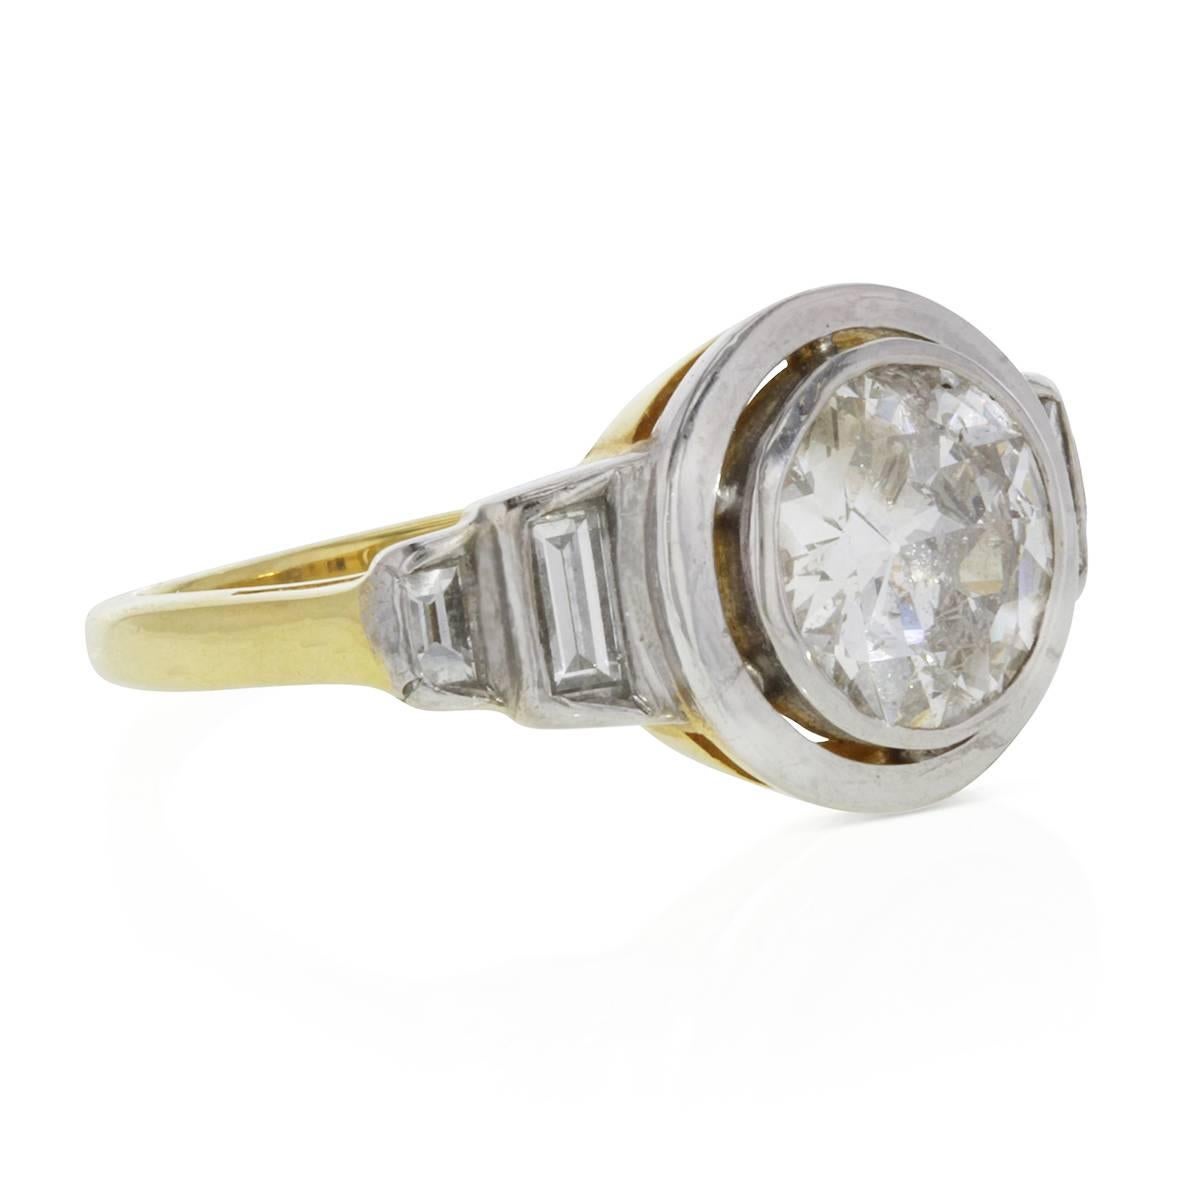 Art Deco engagement rings are by far, the most popular and enduring designs in vintage engagement rings. The Art Deco jewelry design period started in the early 1920s and flourished up to World War II. Here for sale we have bold geometric ring from